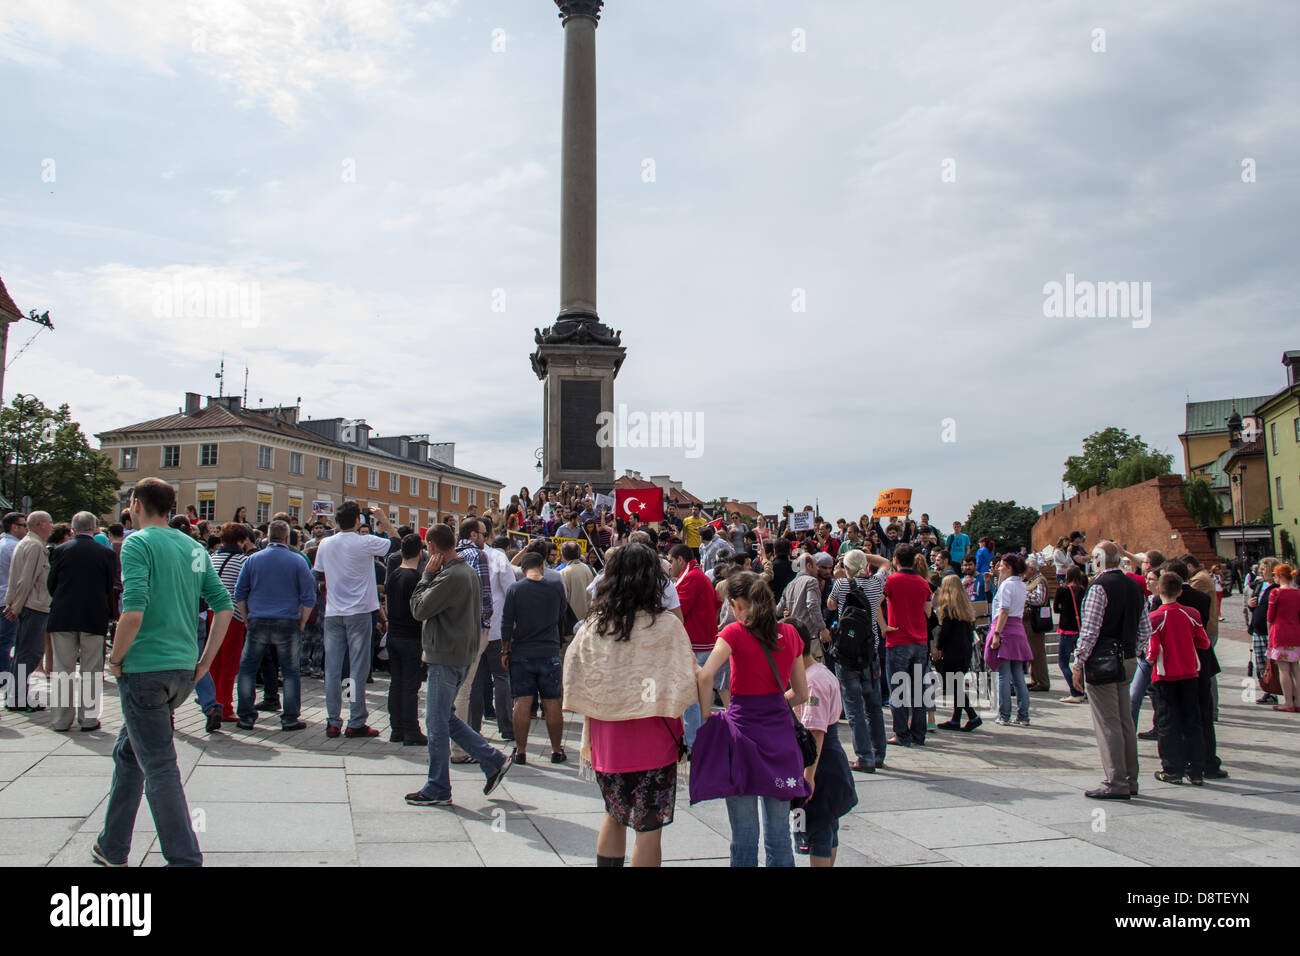 Warsaw, Poland, 2nd June, 2013. Demonstration of Turkish citizens against the policies of the Turkish government. Credit: Marcin Poziemski / Alamy Live News Stock Photo